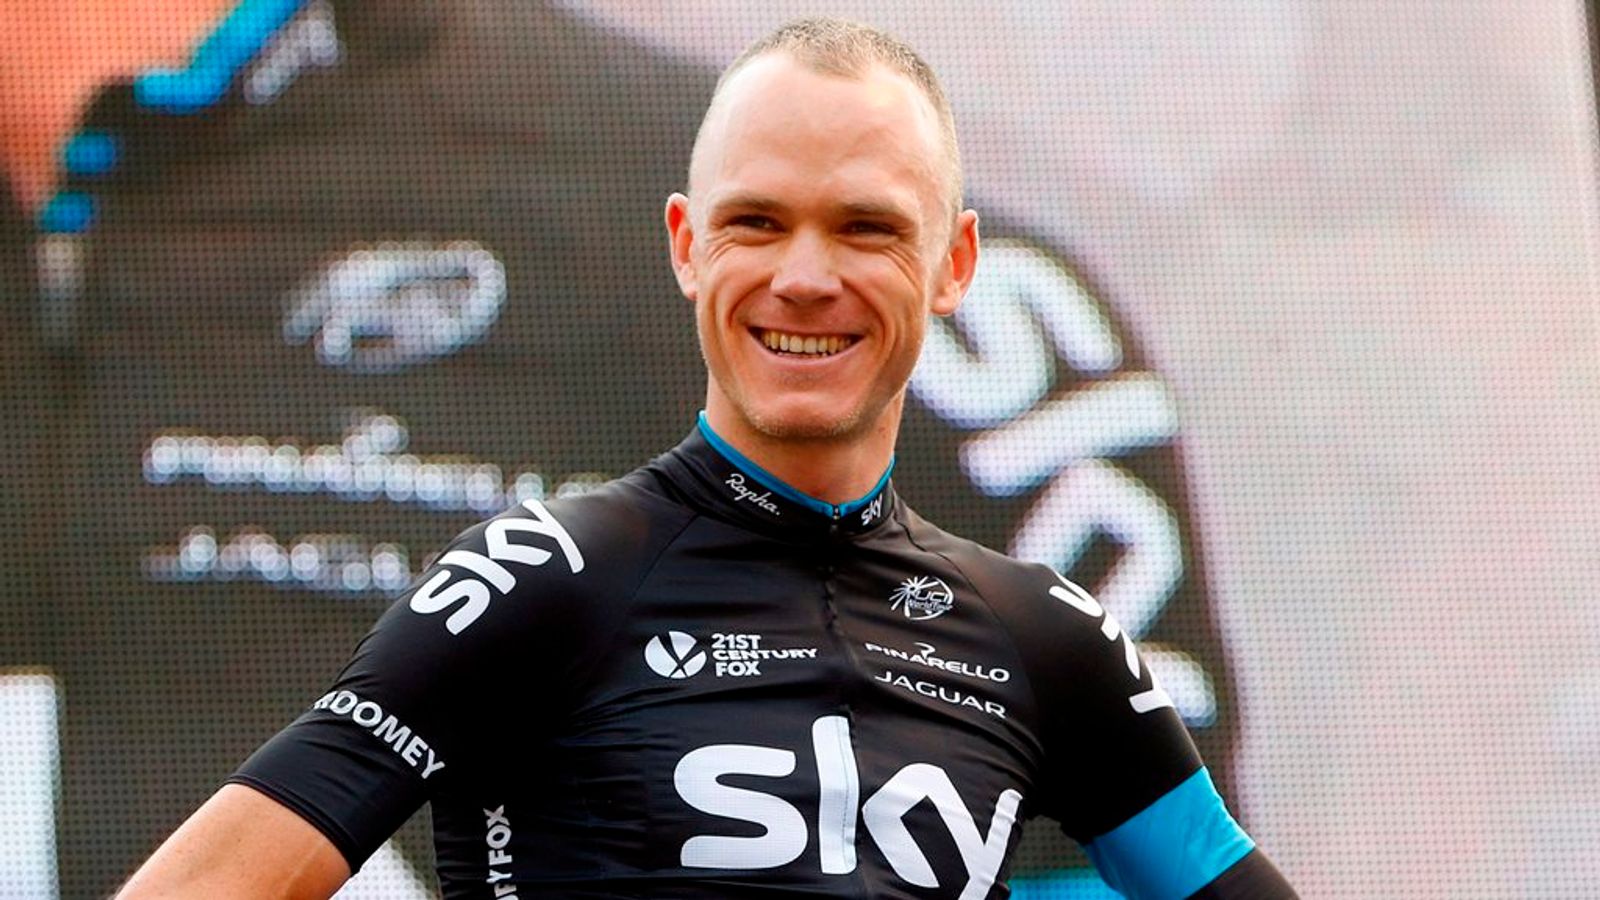 Tour de France Chris Froome says more than Big Four will vie for